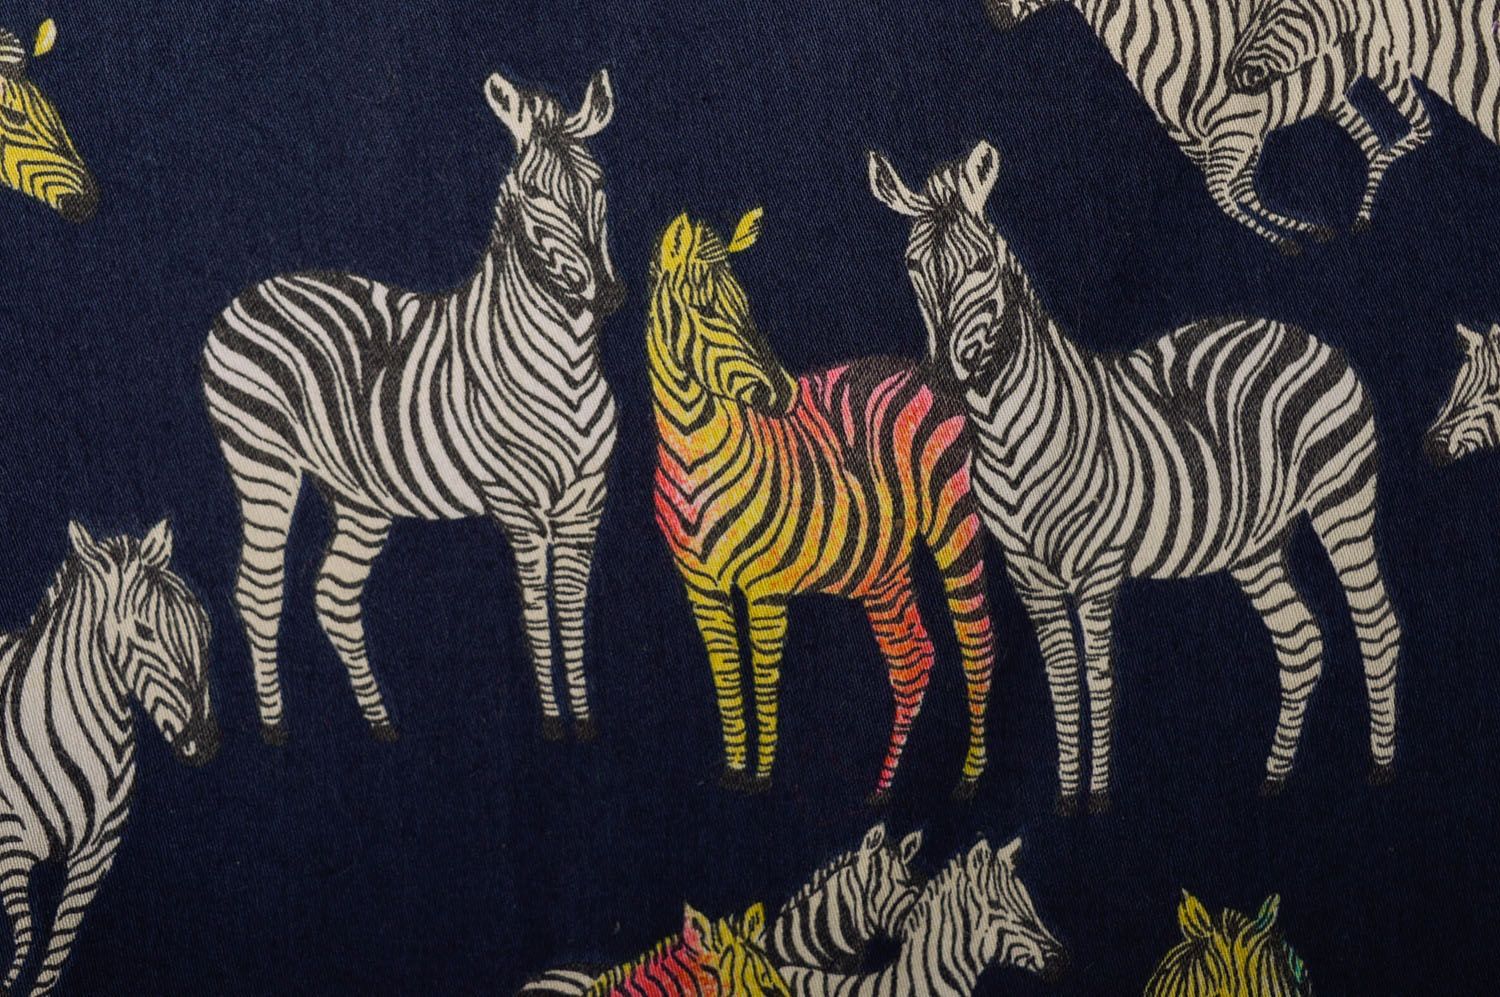 Fabric bag with zebras photo 5